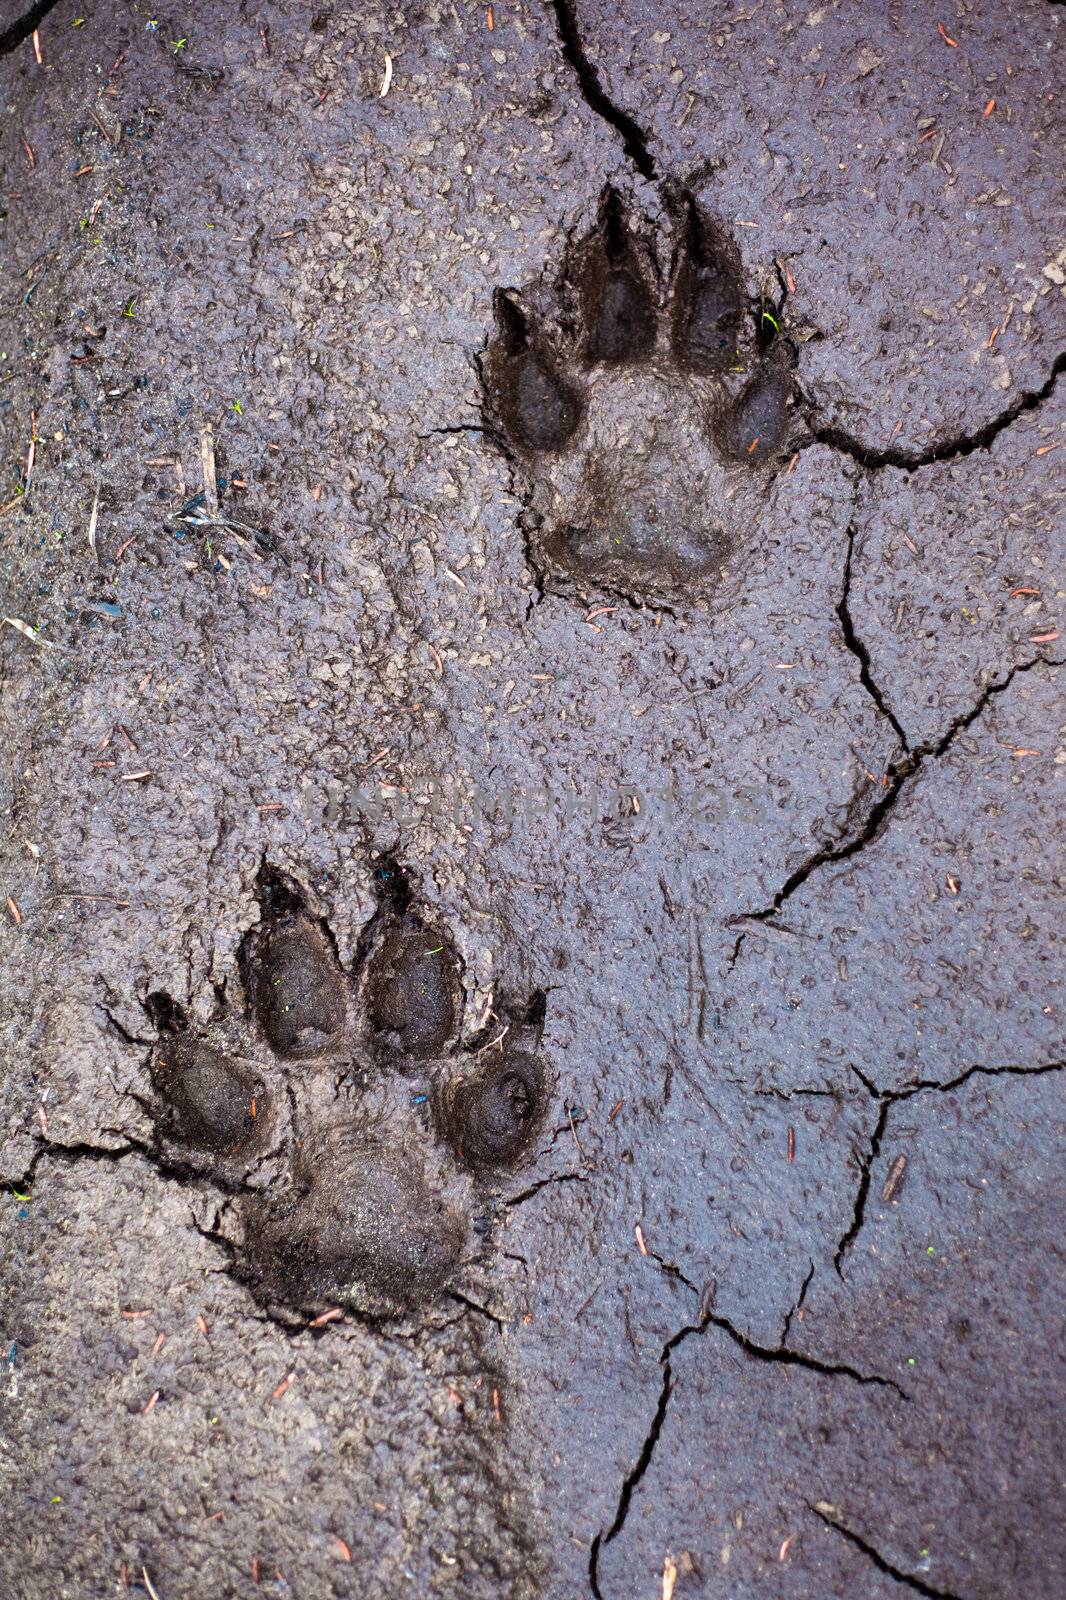 Wolf tracks in cracked mud